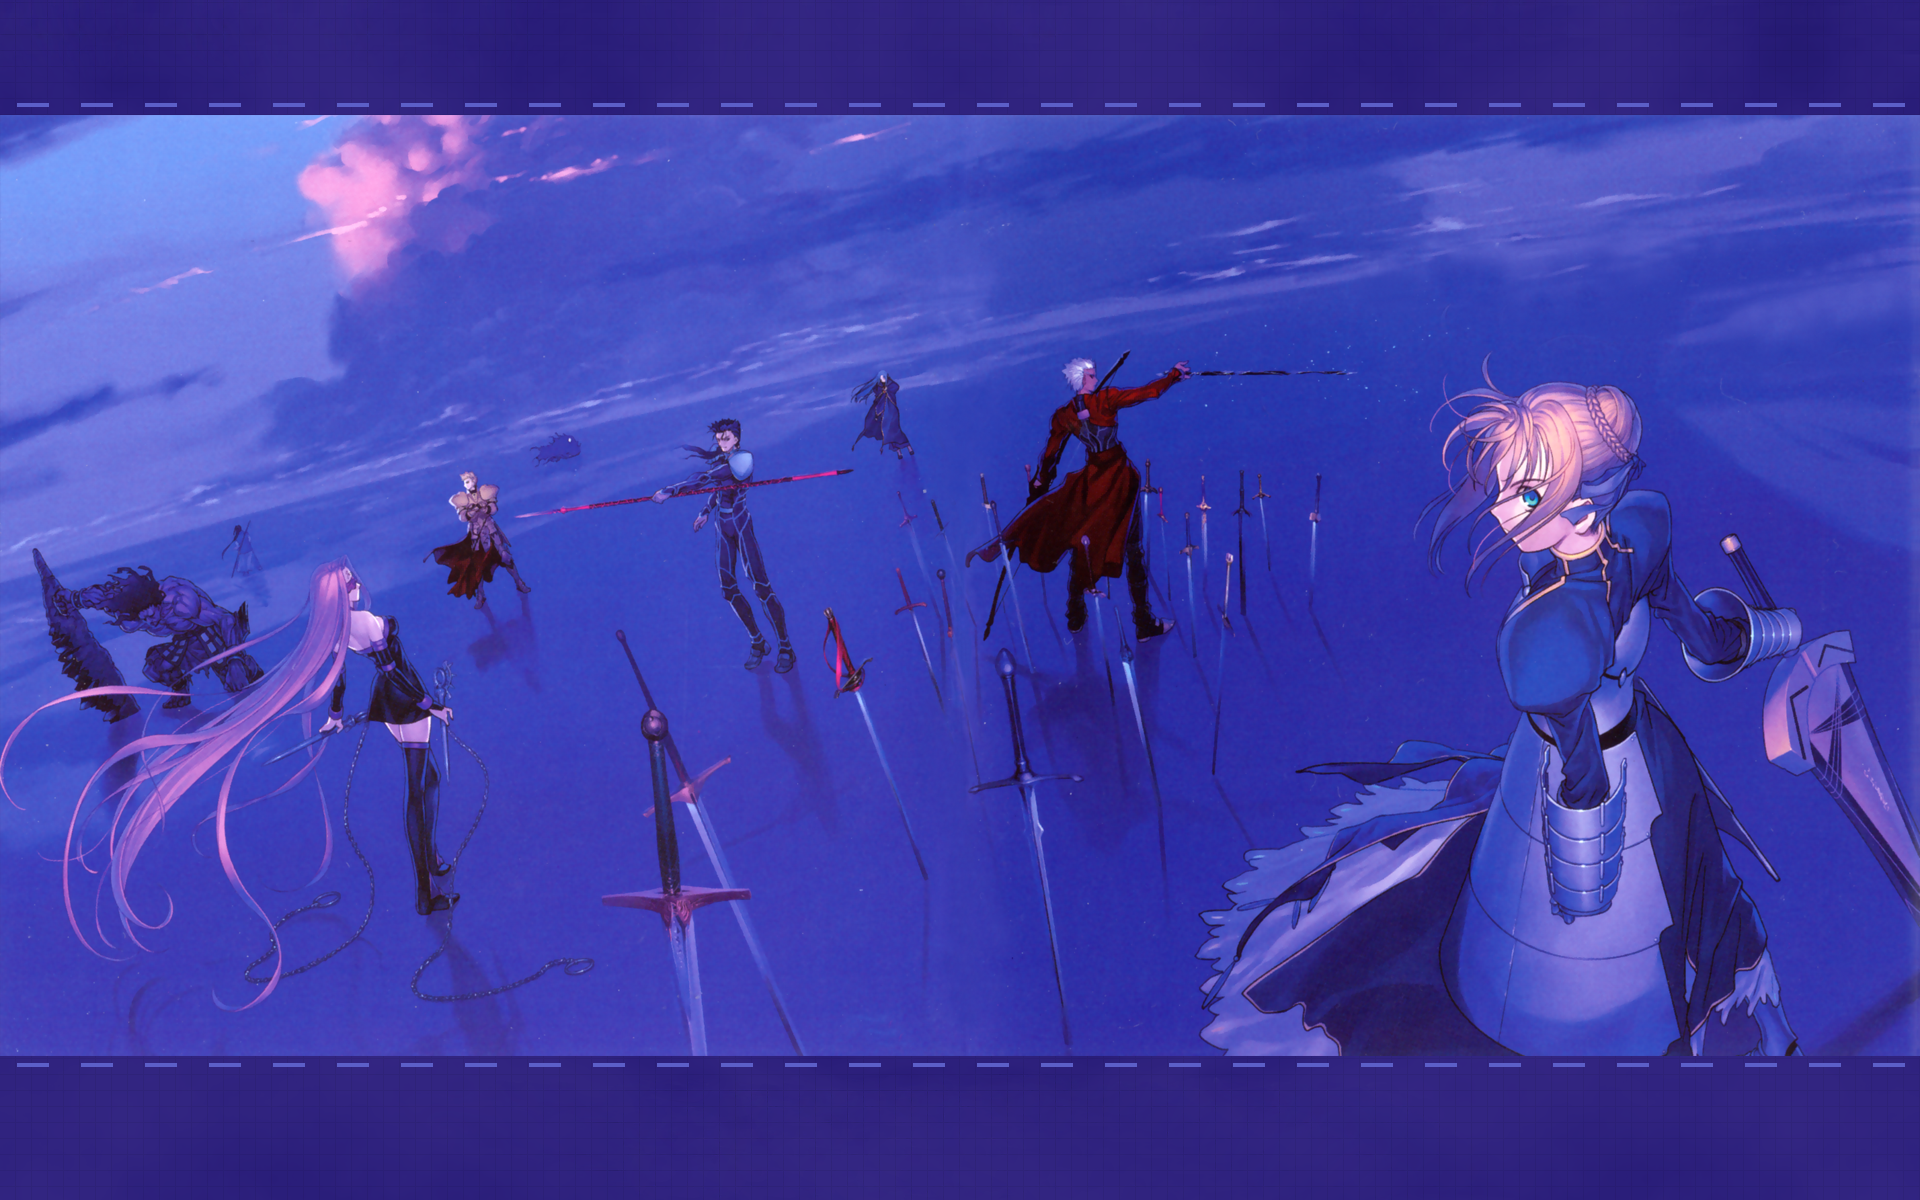 Fate/stay night anime characters including Saber, Lancer, Gilgamesh, Caster, Berserker, Rider, Assassin, and Archer in a desktop wallpaper.